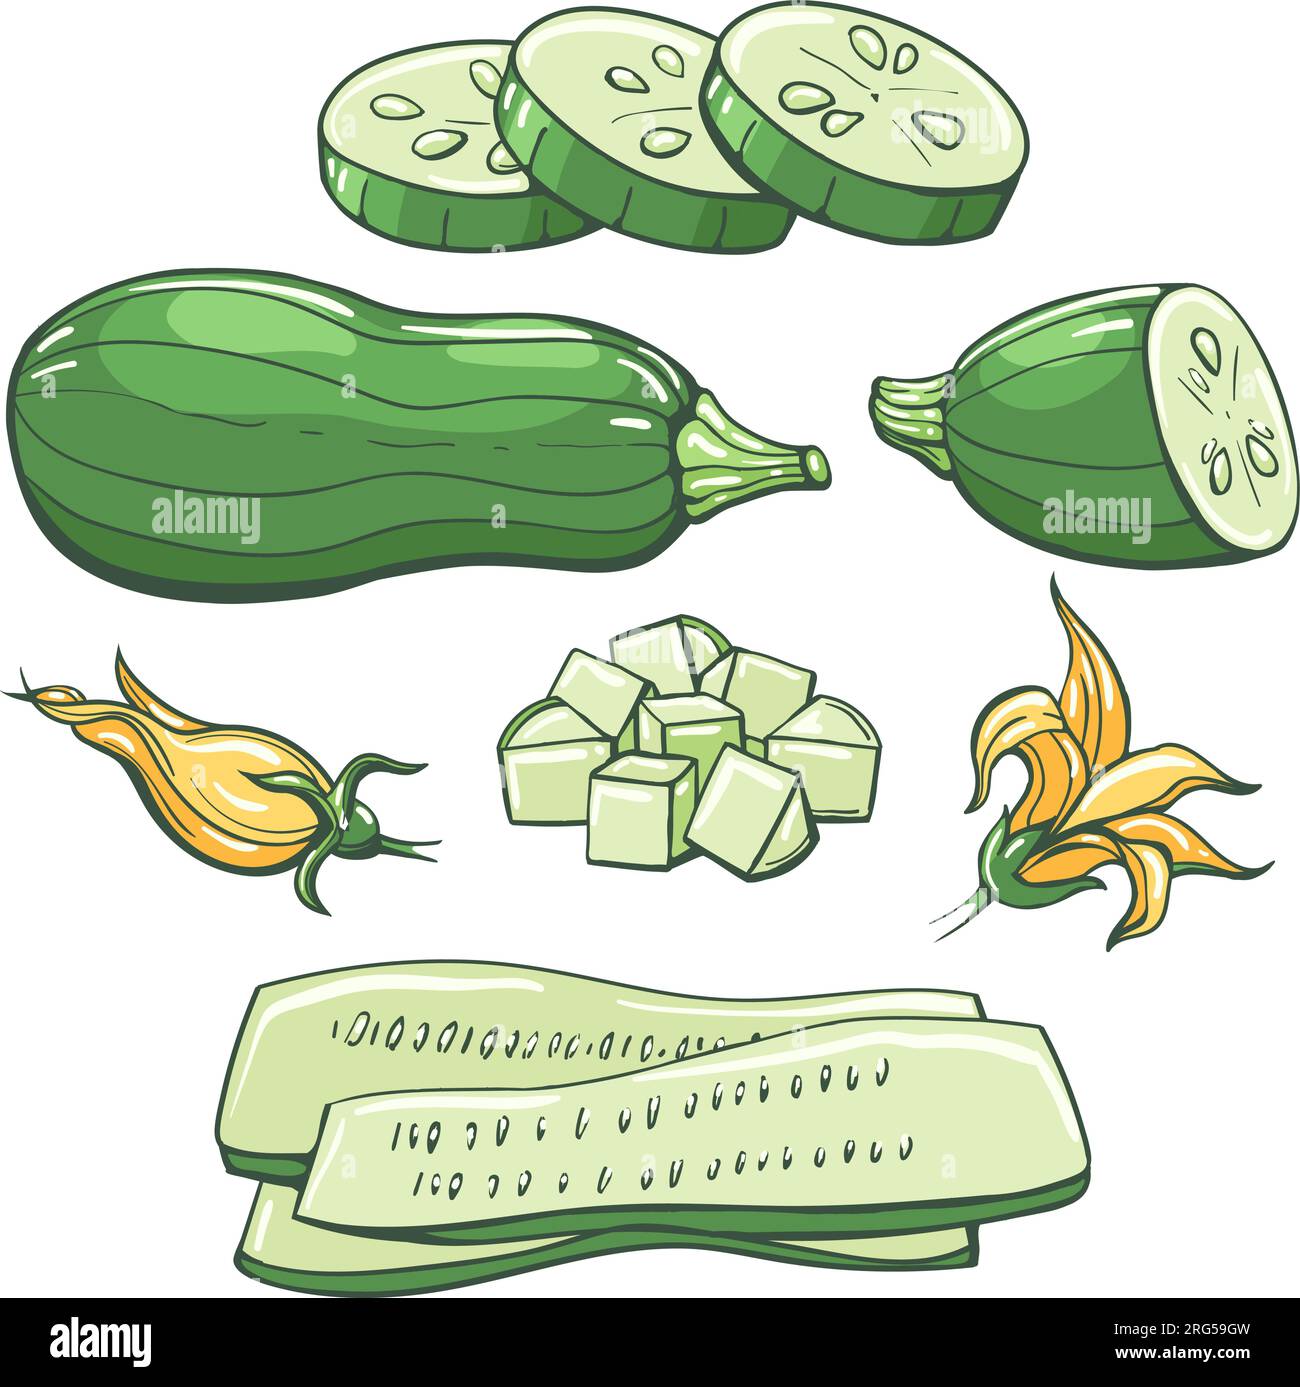 Zucchini vegetables colored sketch Stock Vector